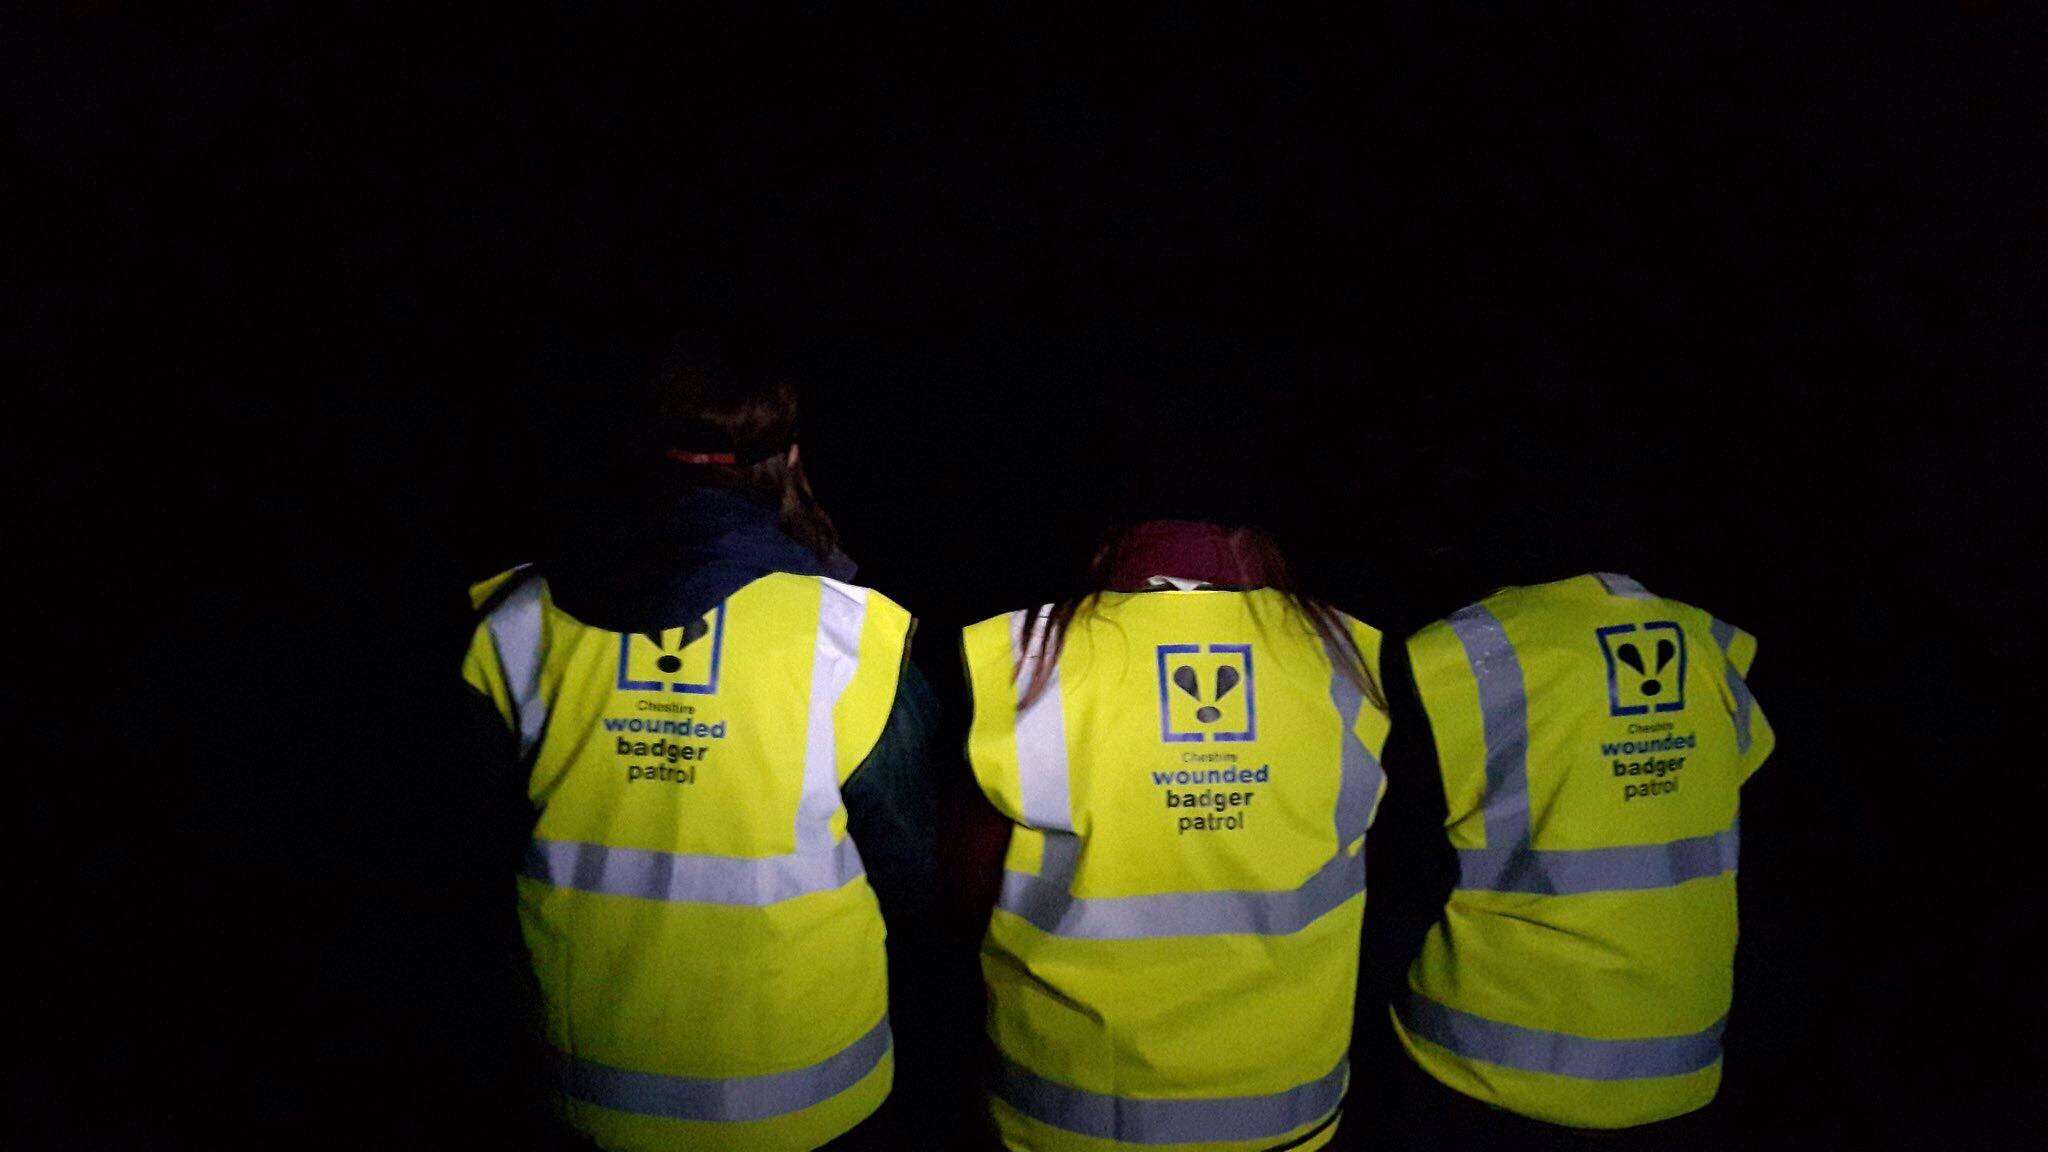 Volunteers looking for badgers who need saving in Cheshire, England